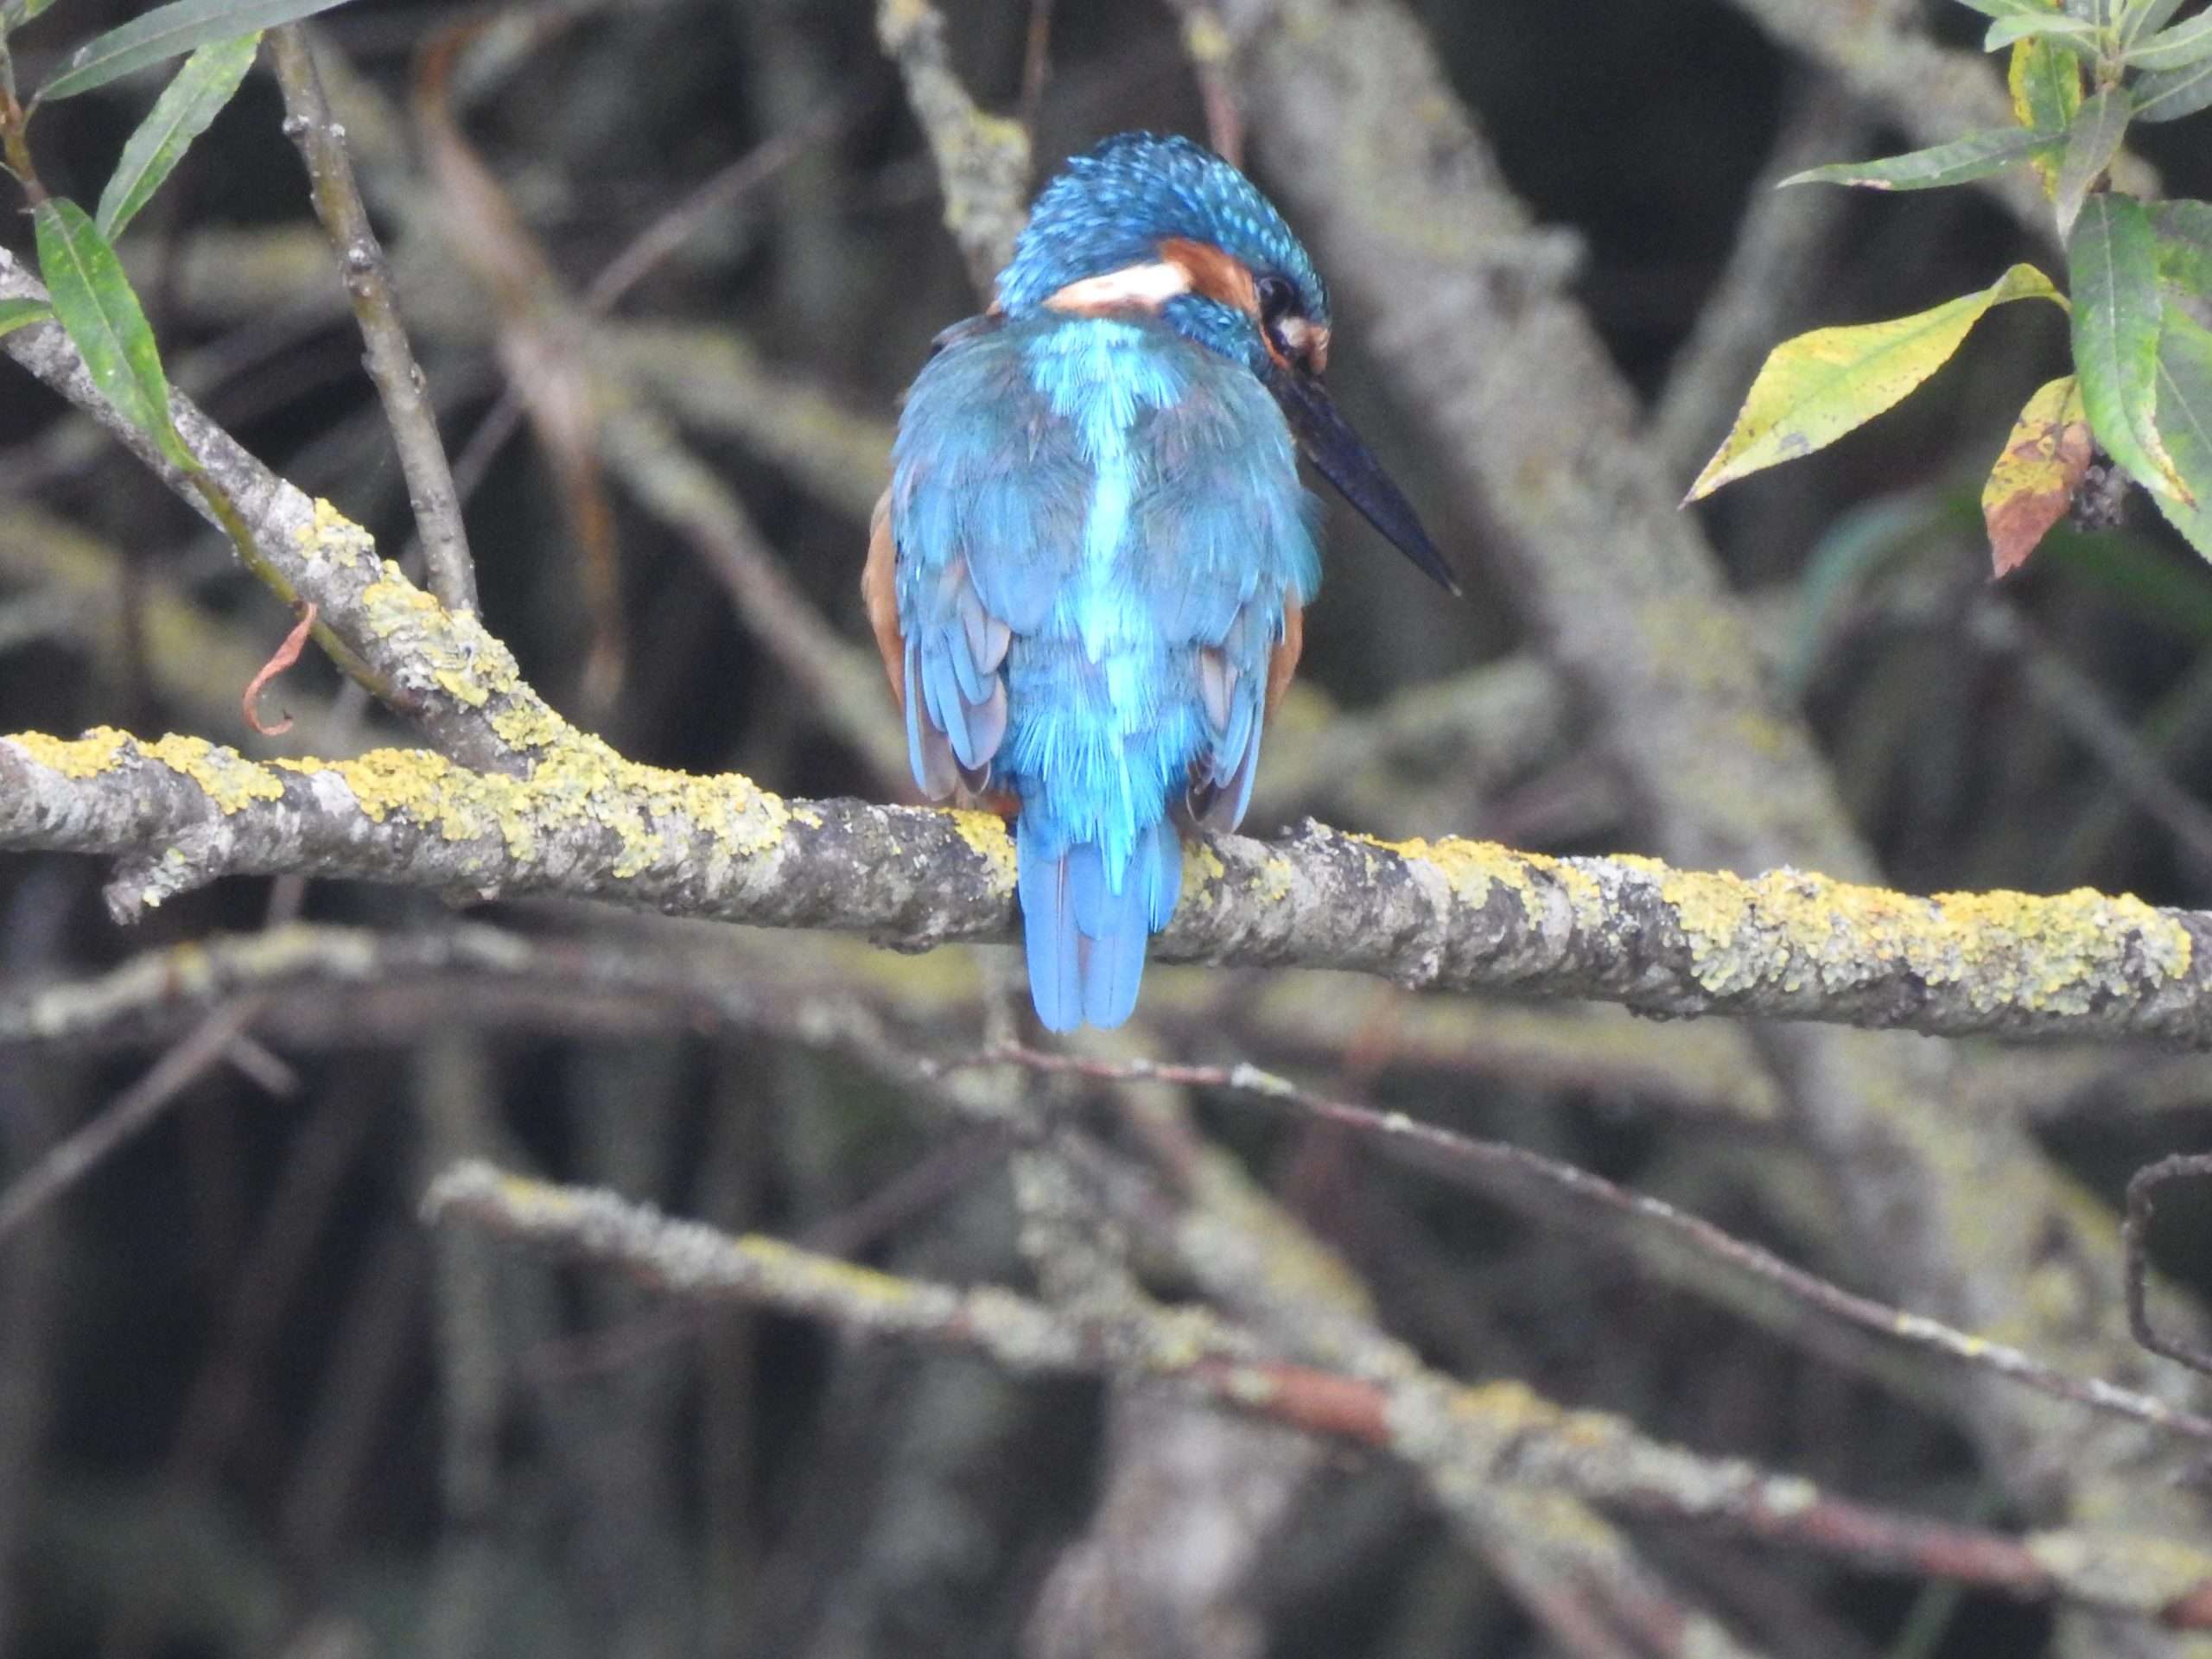 Male kingfisher on branch